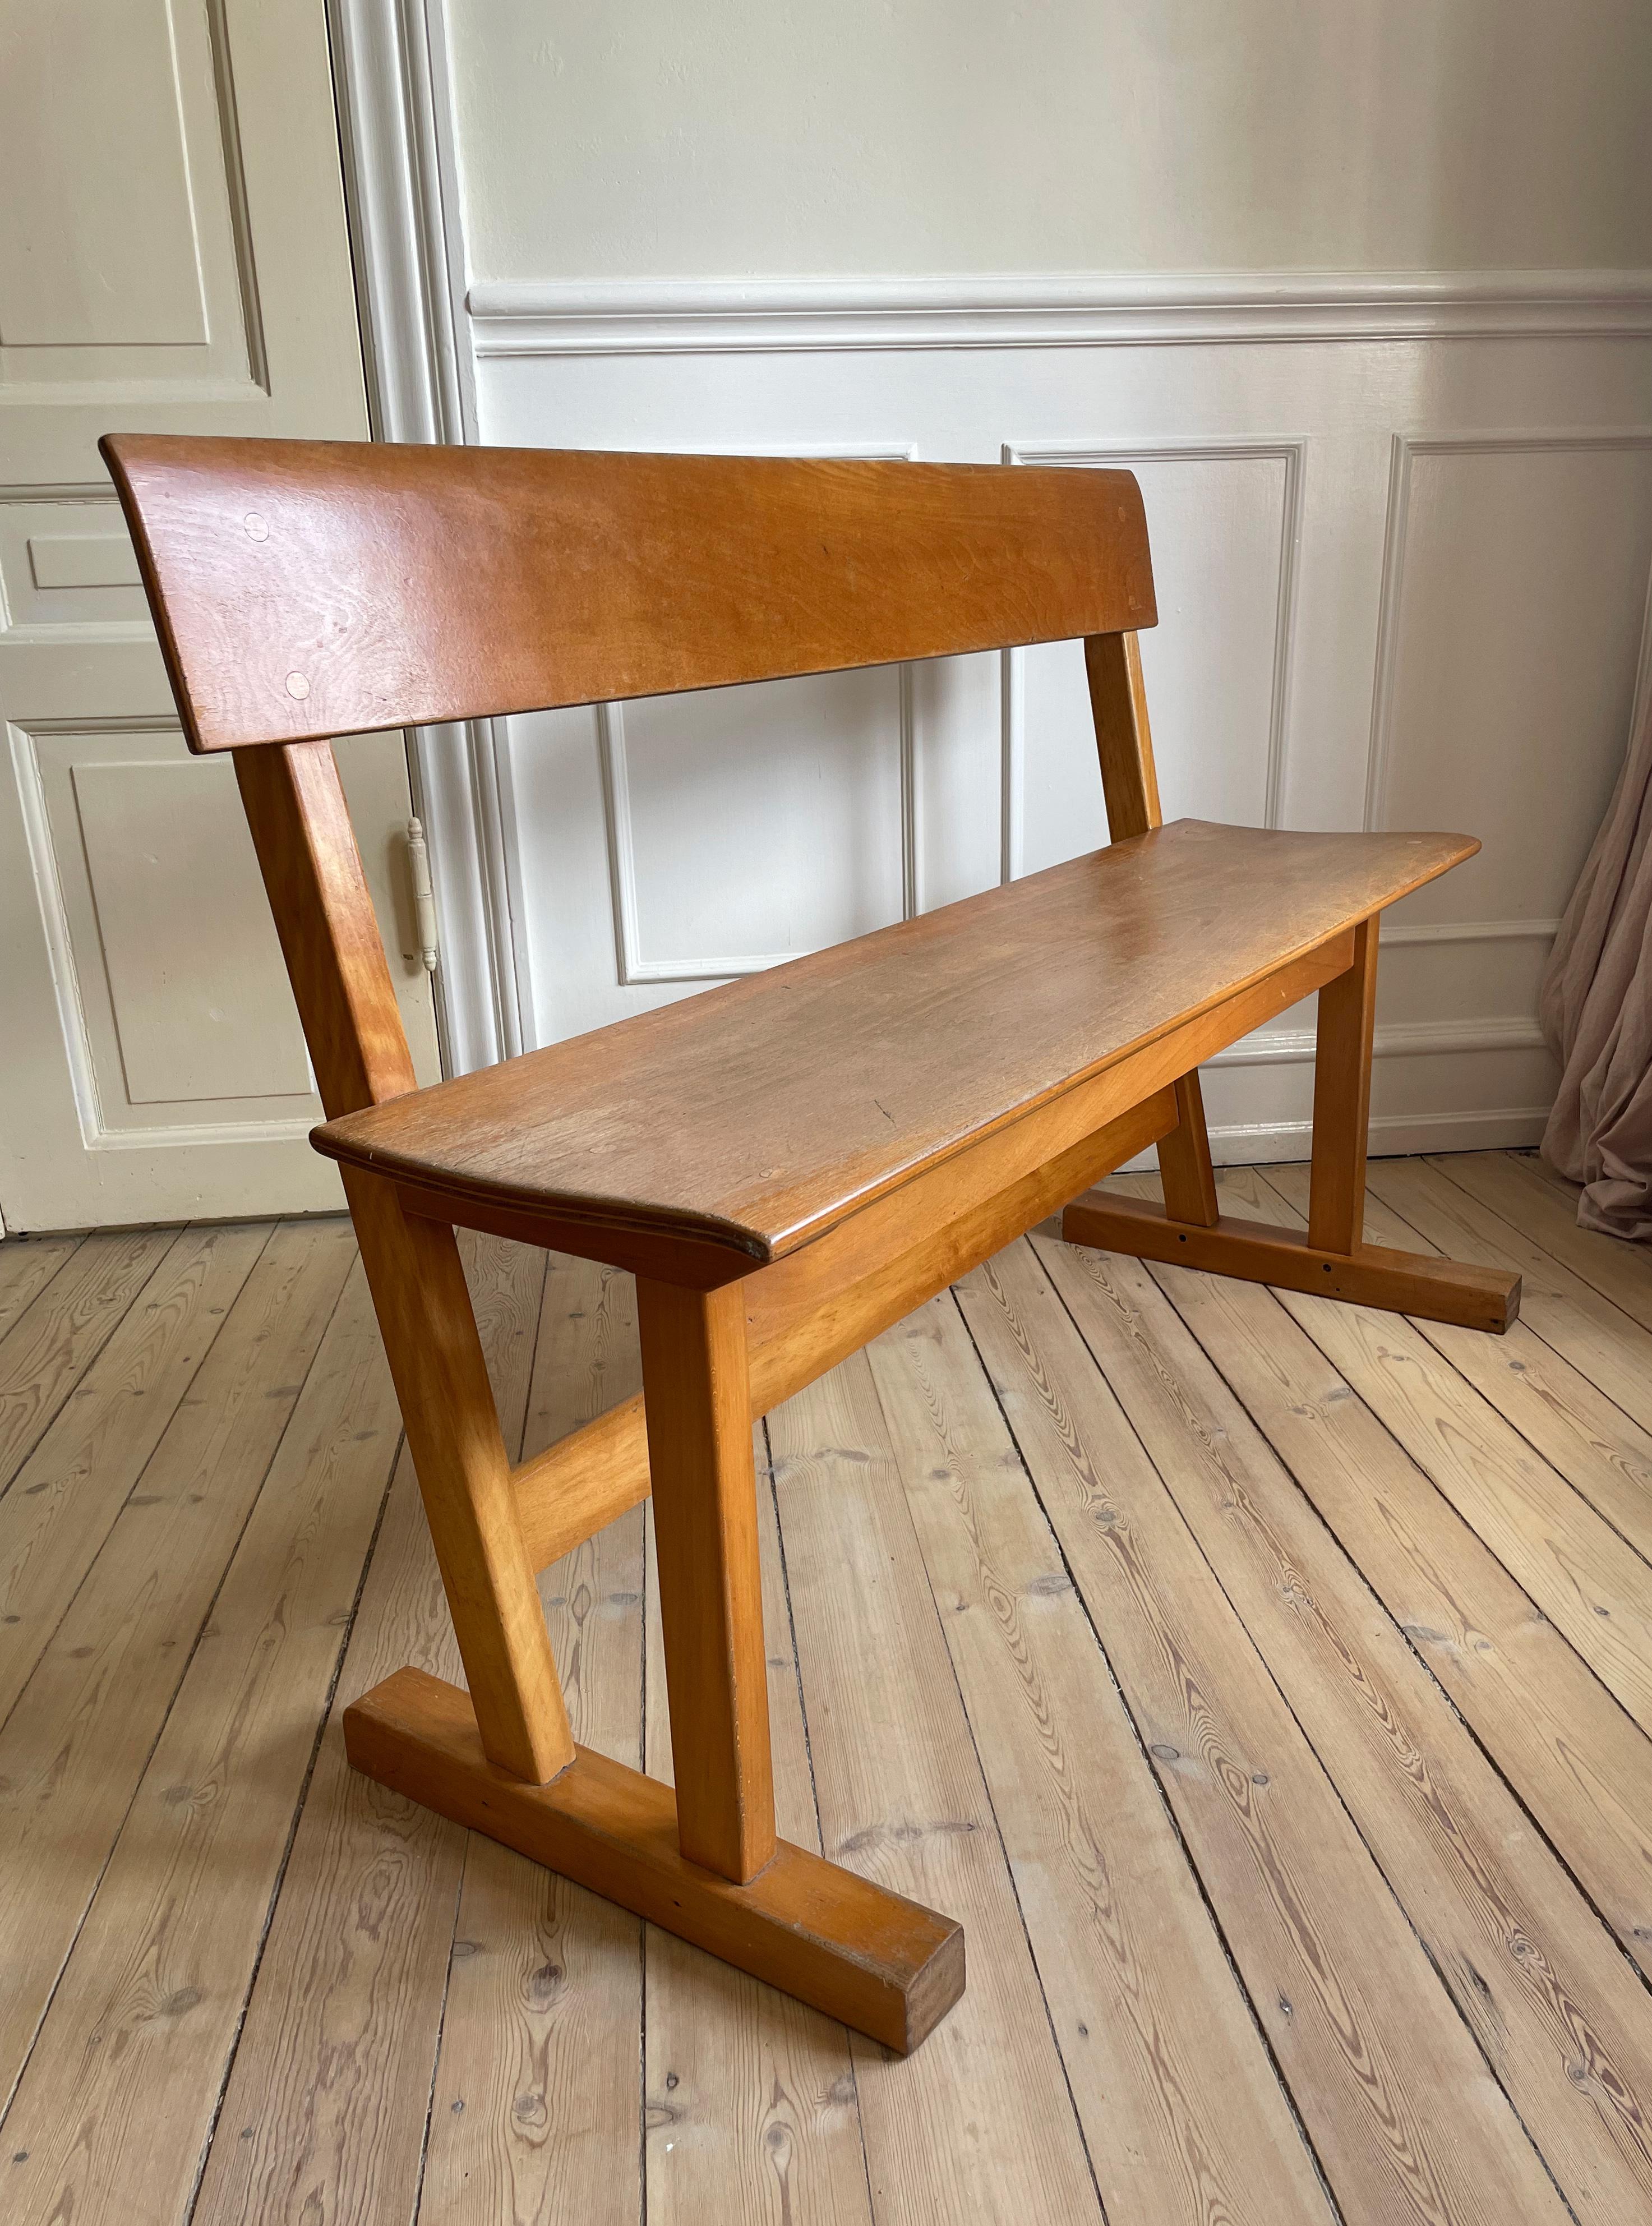 Danish Modern Hand-Crafted Wooden Bench, 1950s For Sale 8